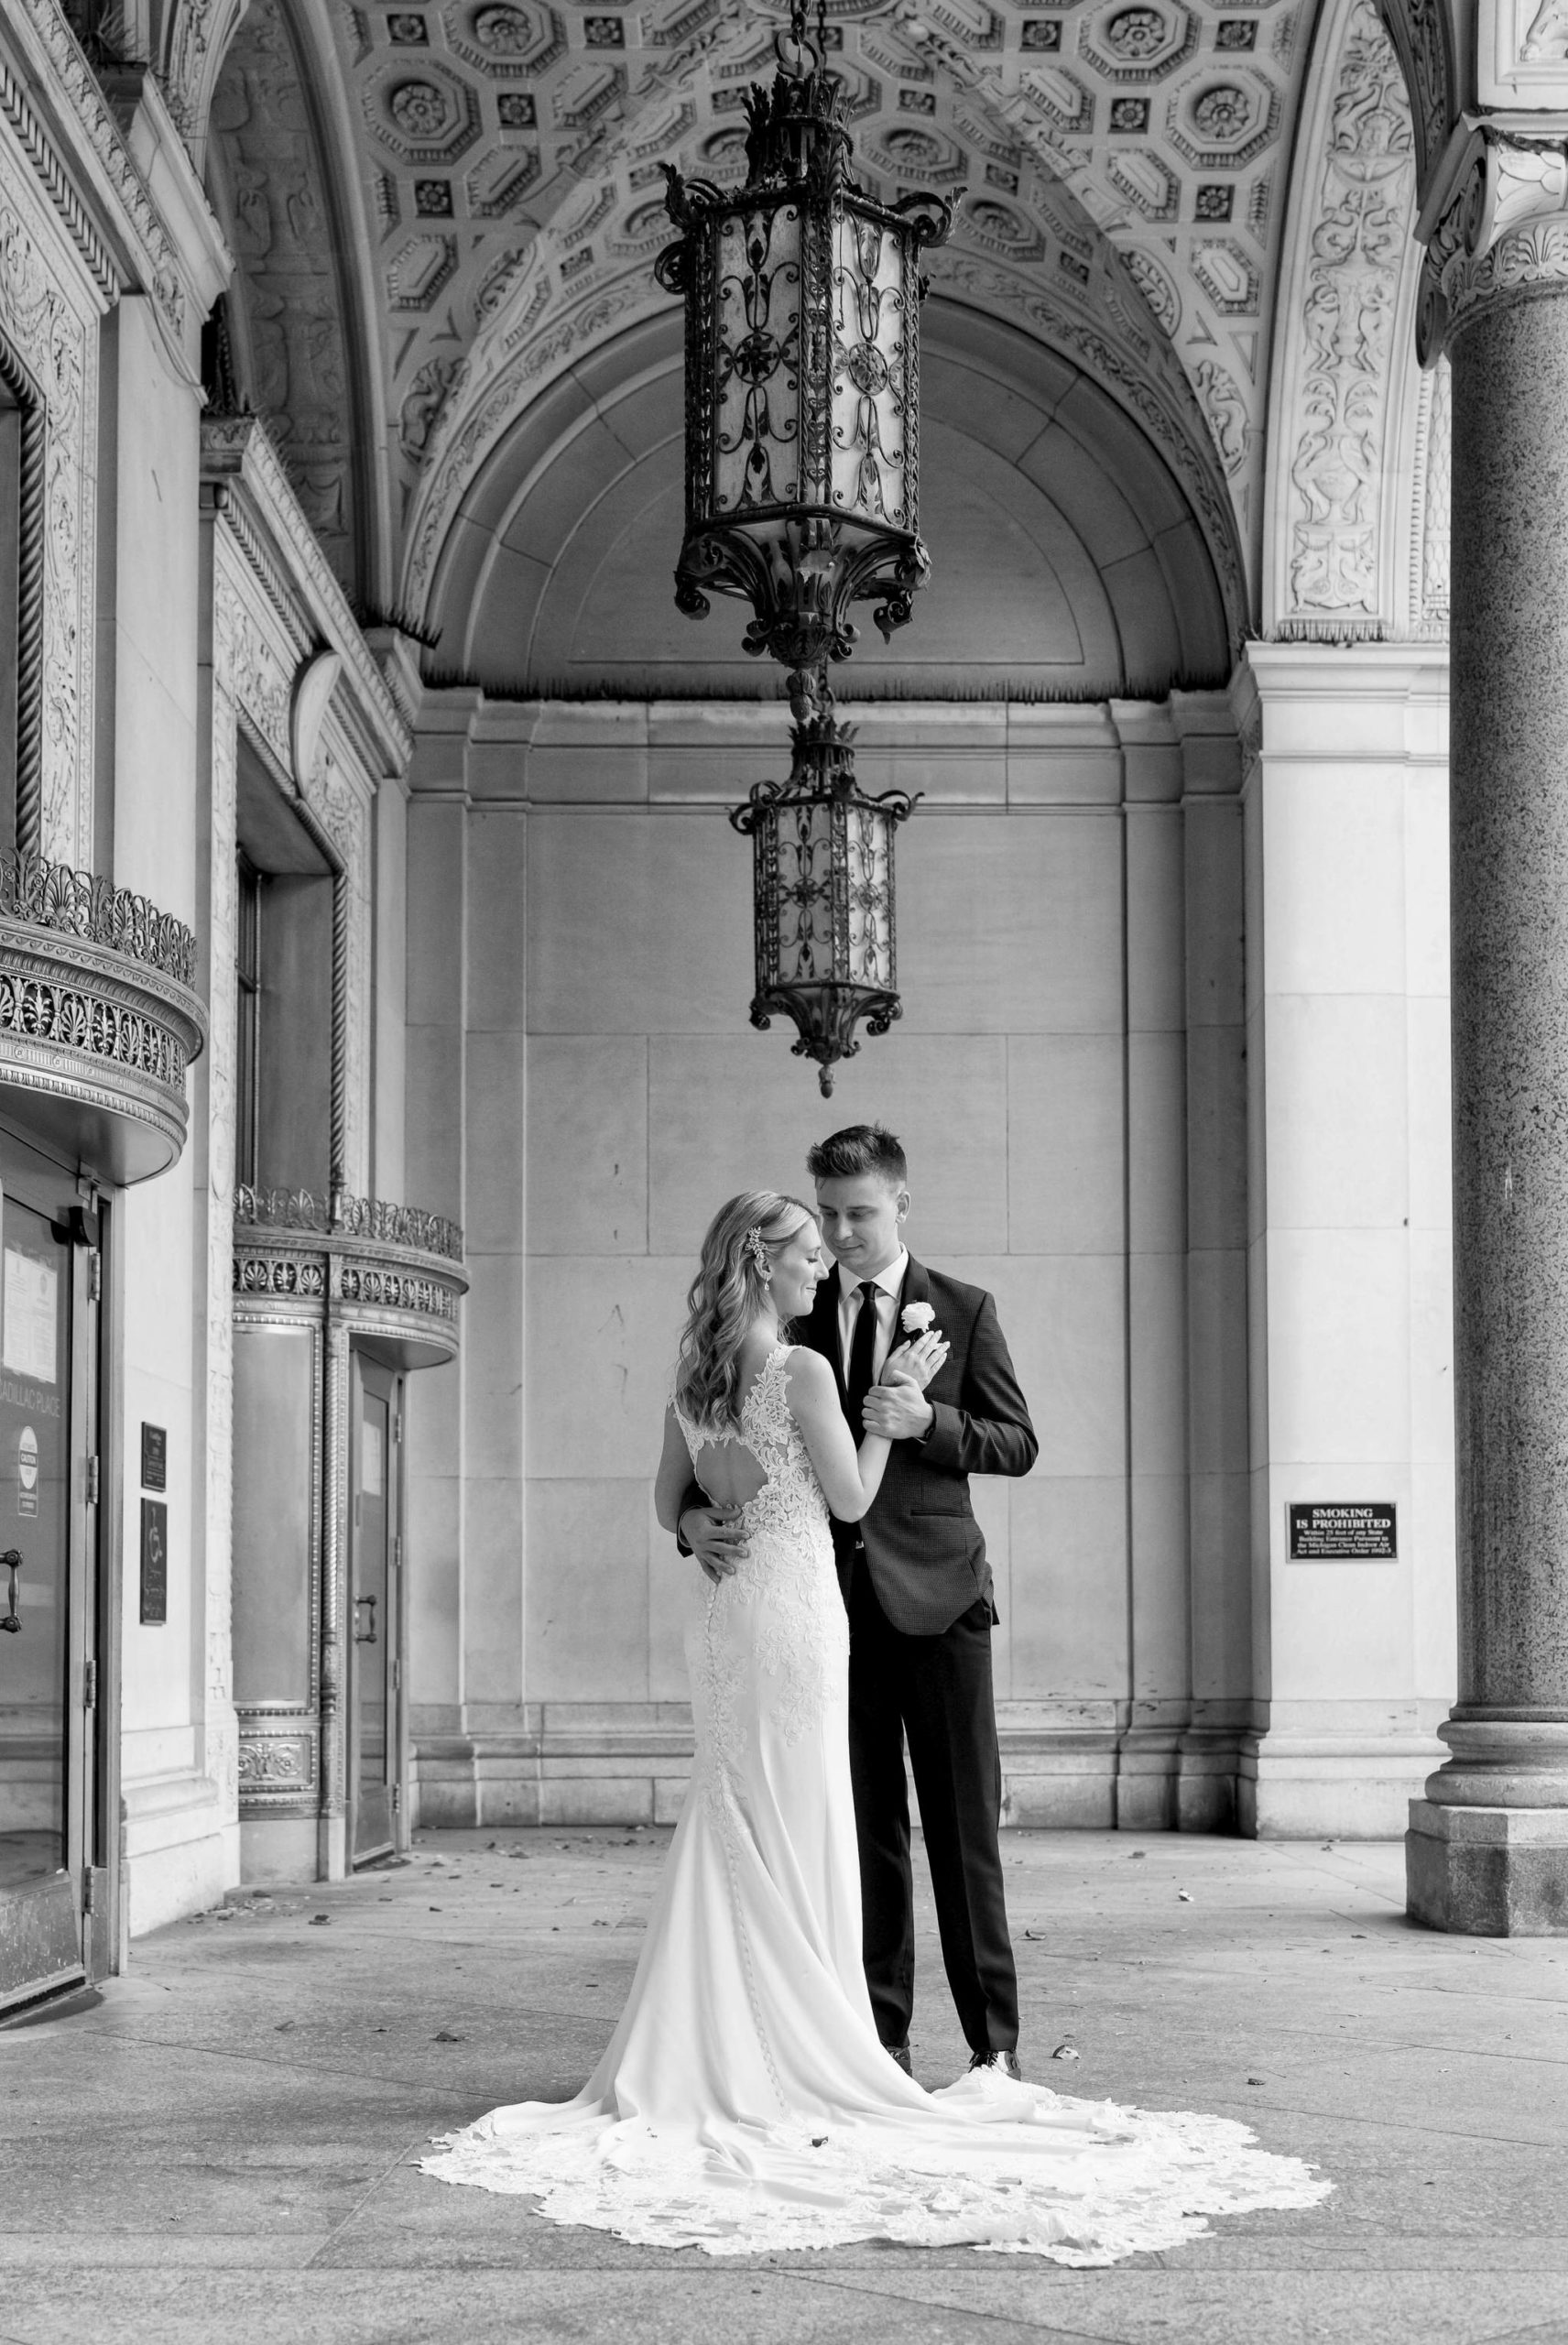 A bride and groom pose elegantly under the arches of the Cadillac Place Apartments on the wedding day.  